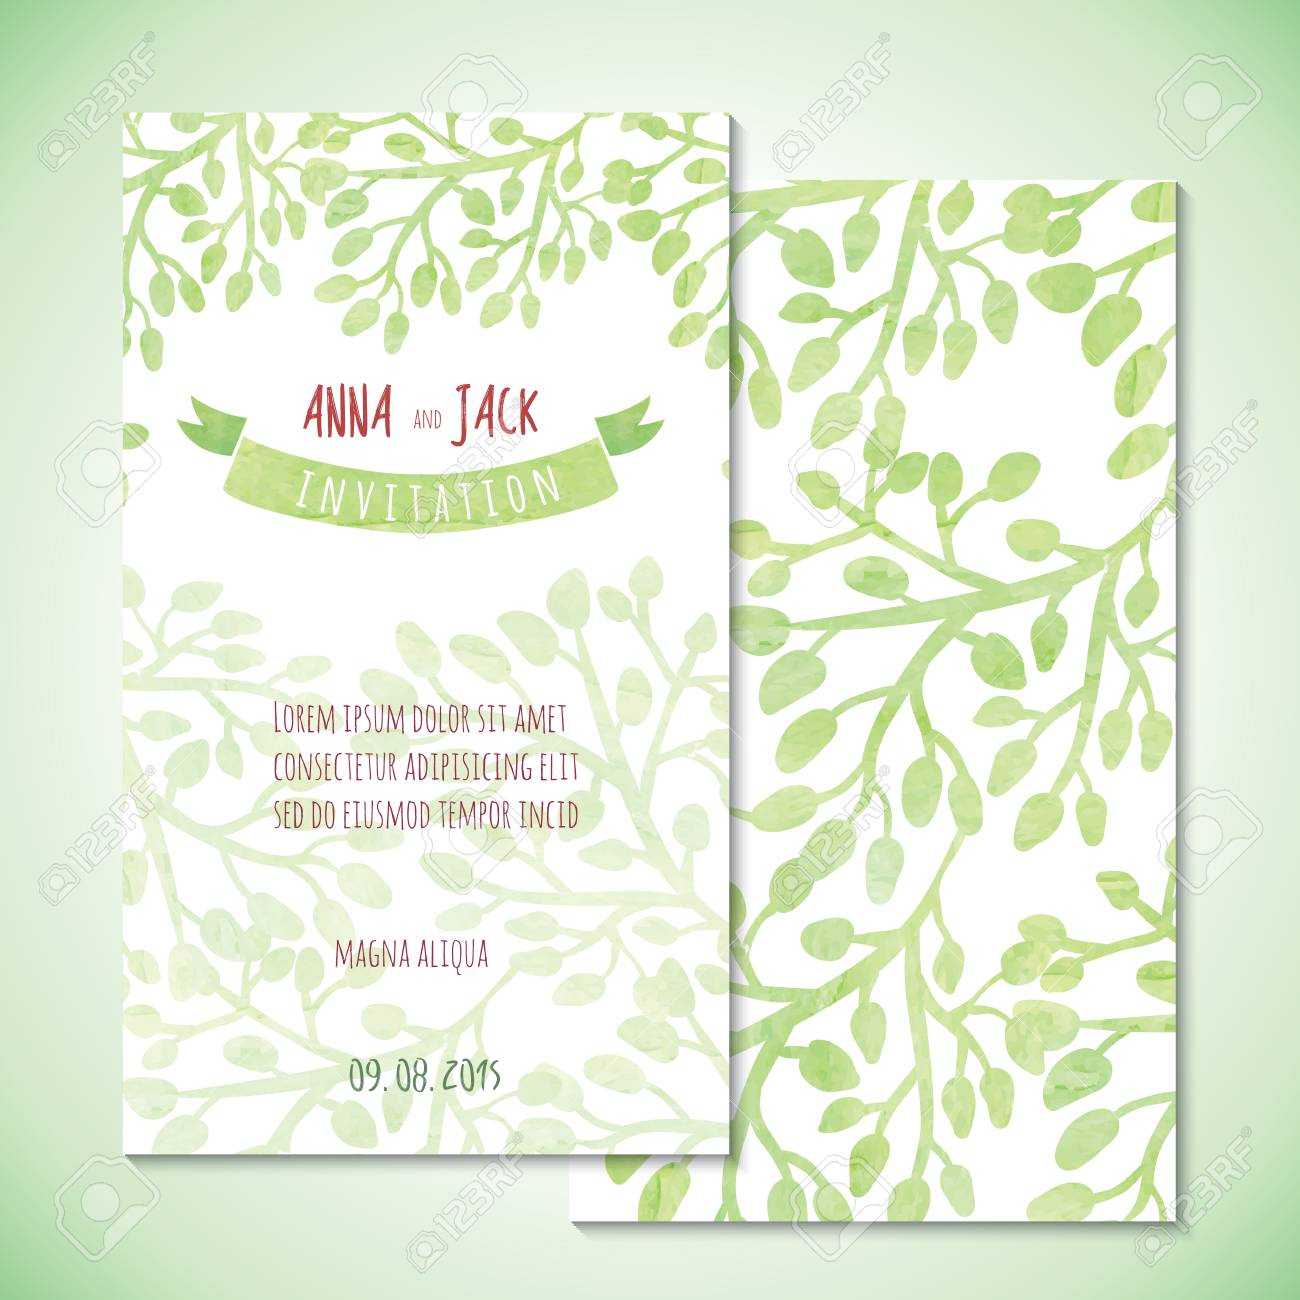 Watercolor Card Templates For Wedding Invitation, Save The Date.. Within Save The Date Cards Templates